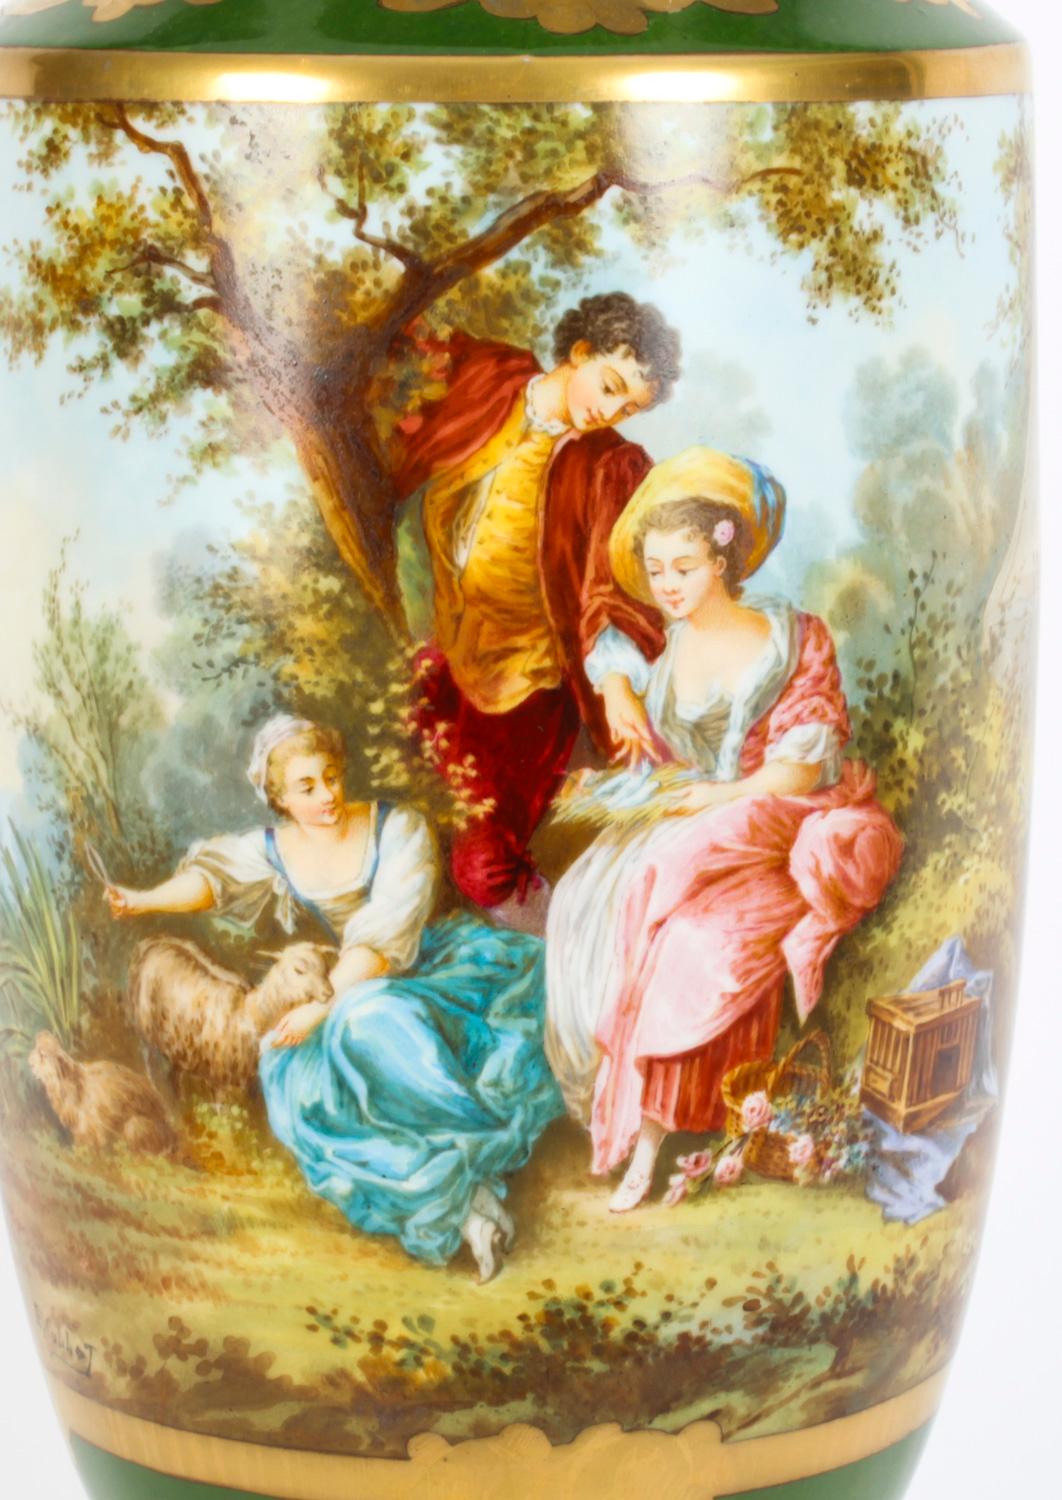 This is a fine quality French Sèvres porcelain and gilt-bronze-mounted vase by Manufacture Nationale de Sèvres and signed by the artist E Collot dating from Circa 1890.

Beautifully hand painted with romantic figures under a tree, with gilt